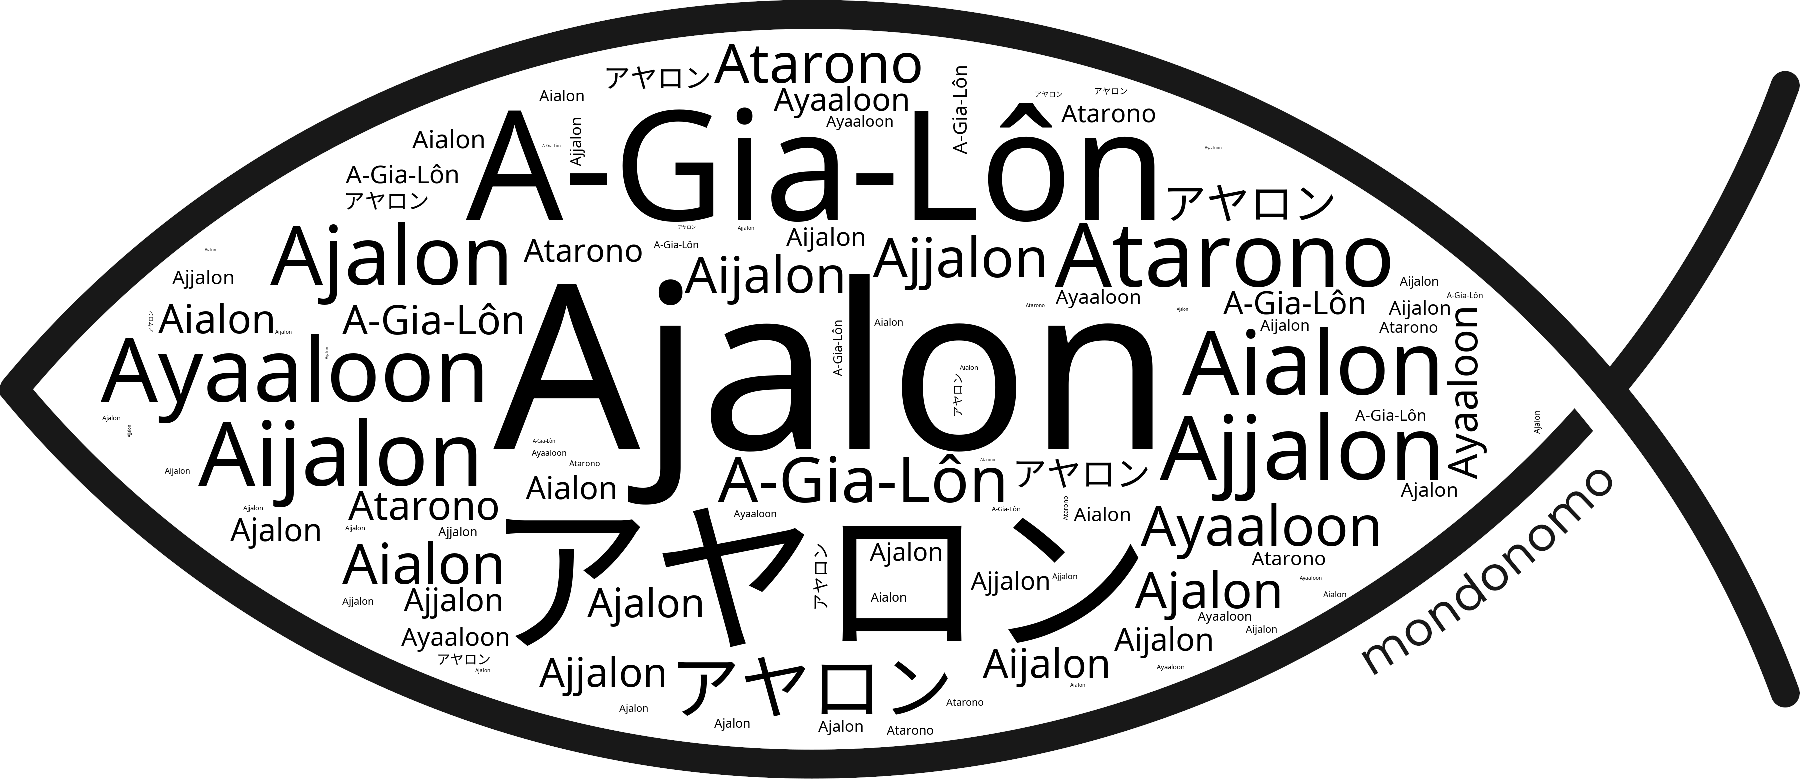 Name Ajalon in the world's Bibles